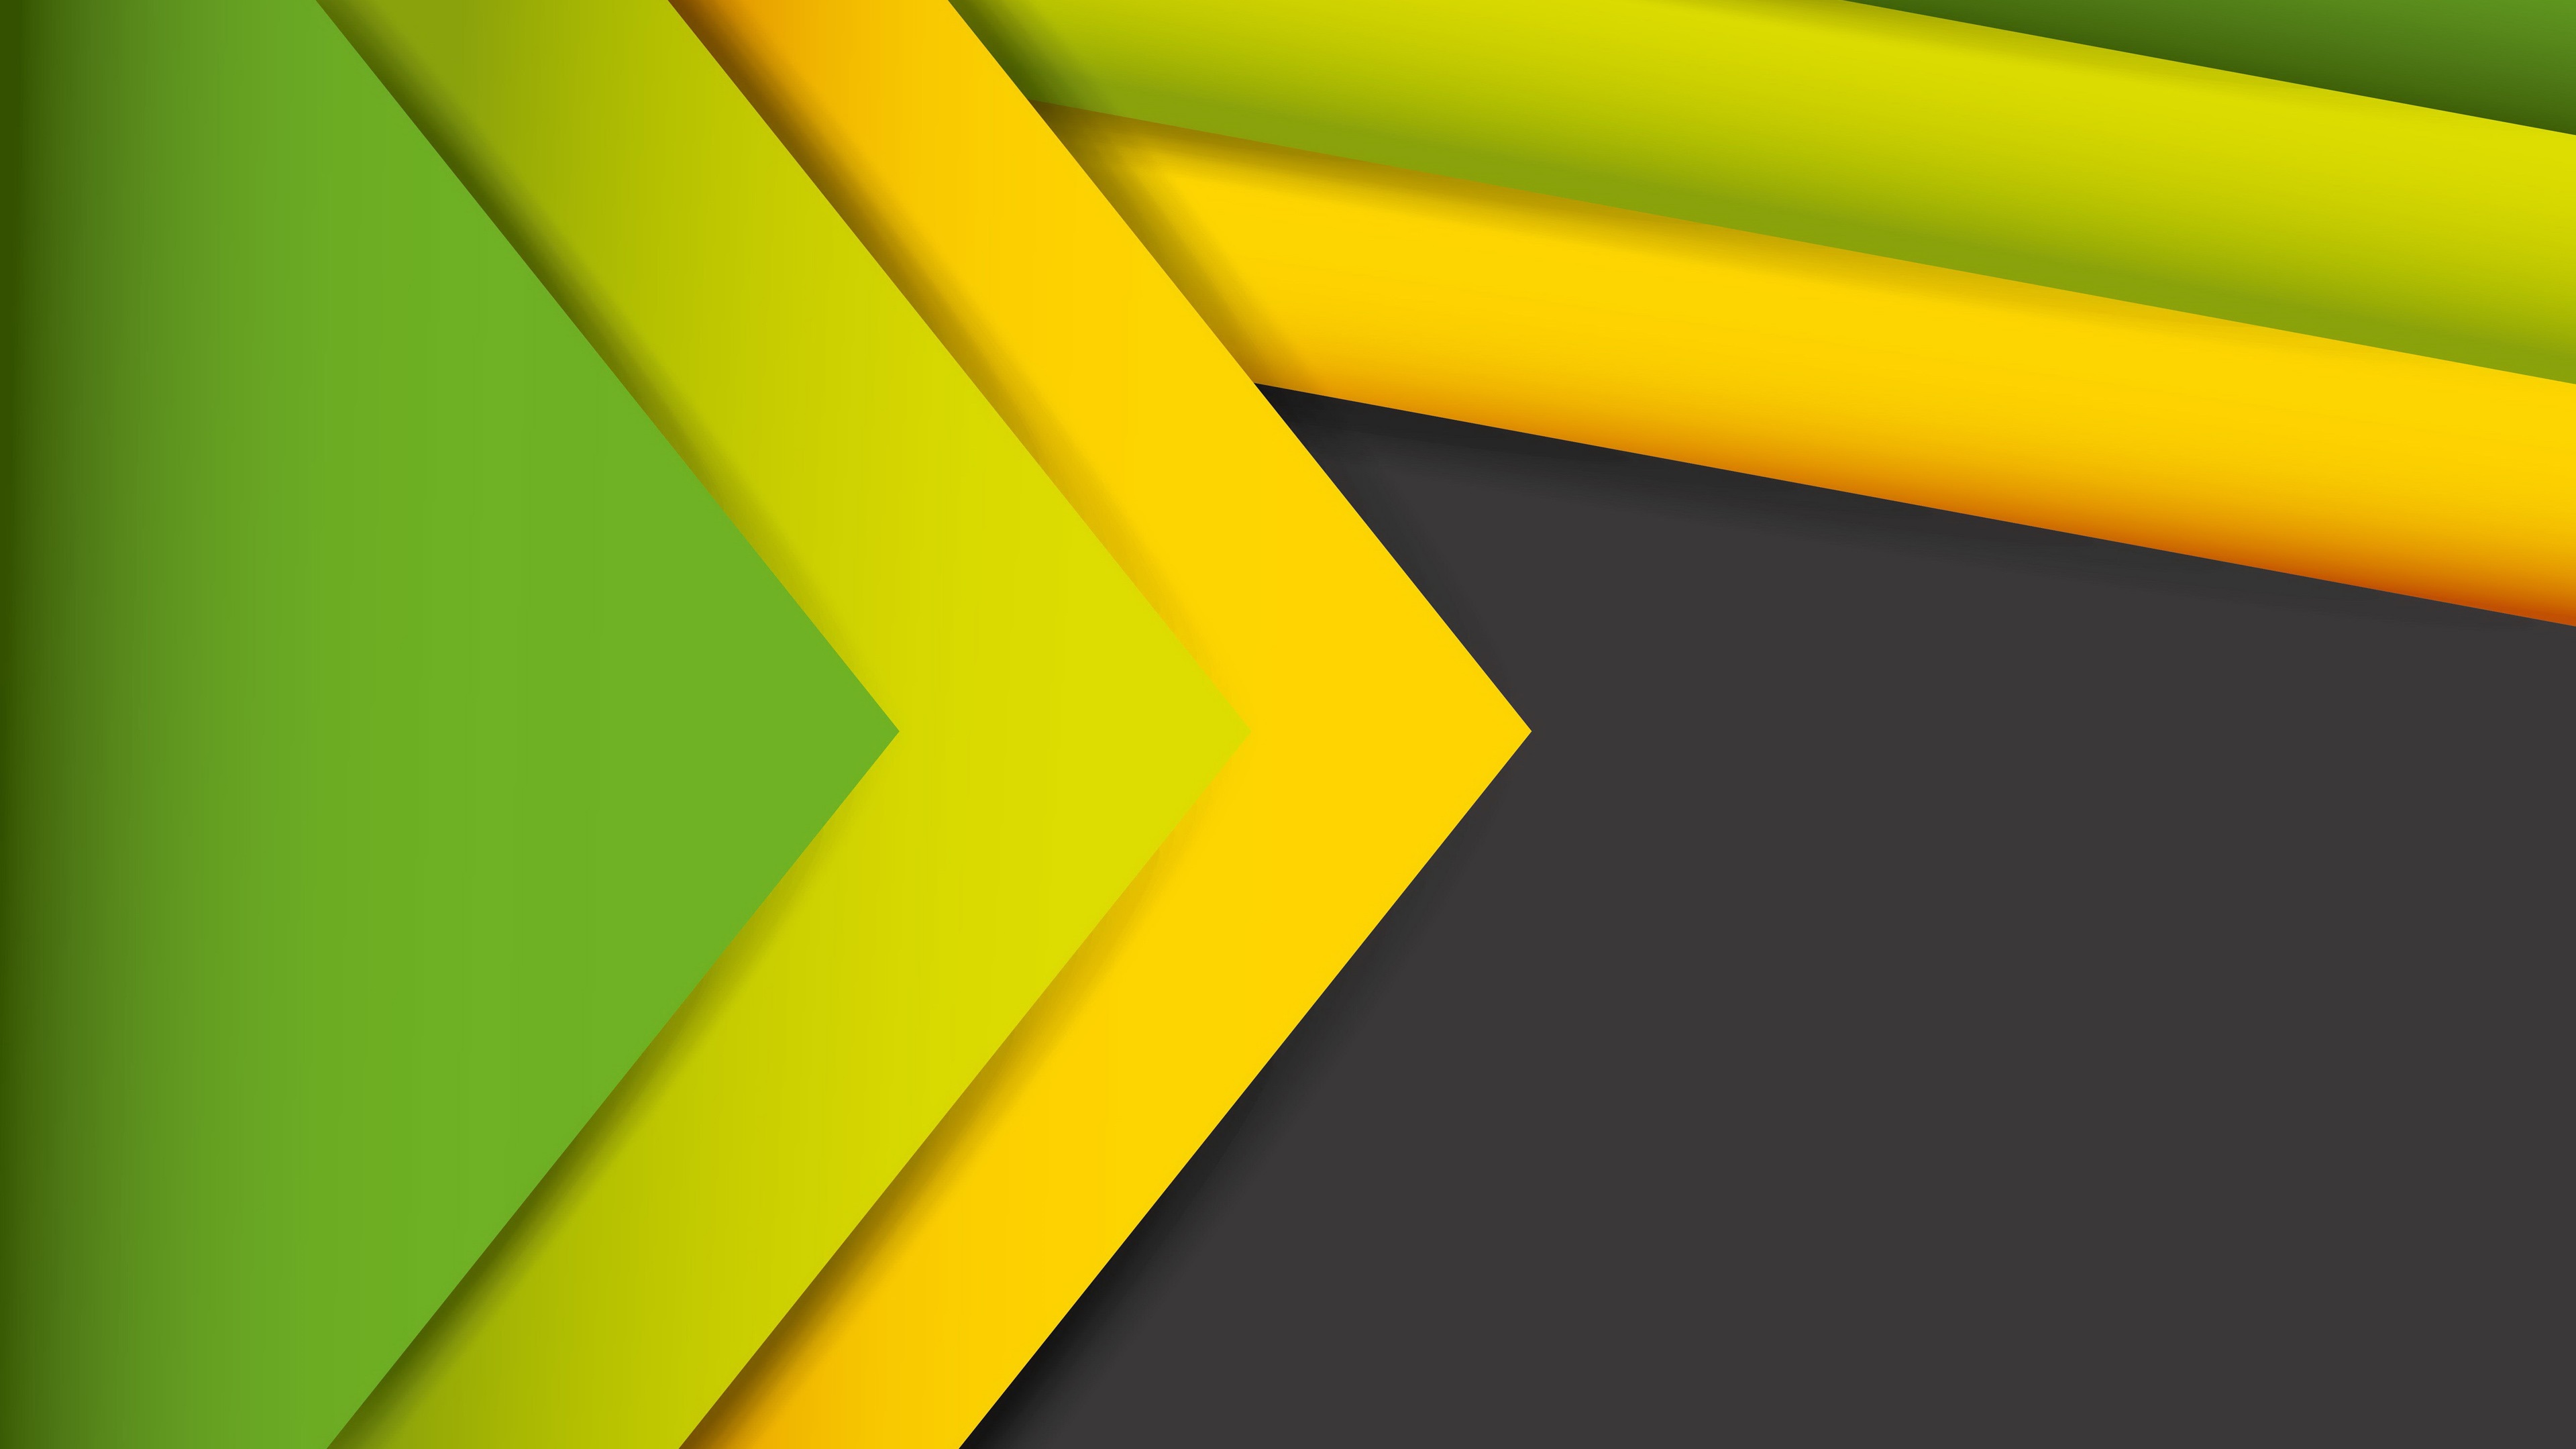 This Wallpaper Green And Yellow Background HD